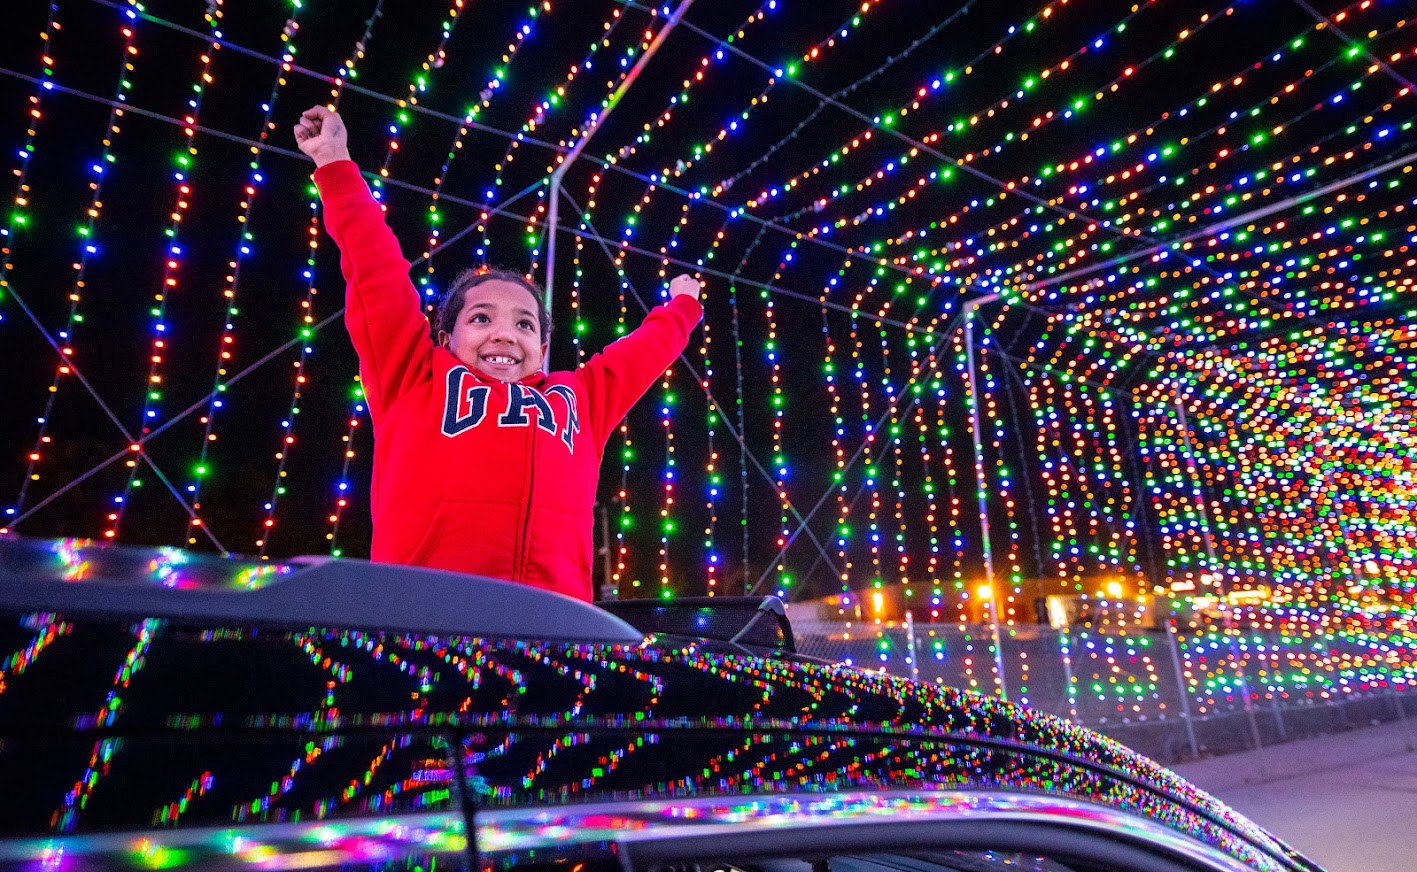 Child sticks out of car amid Christmas lights all around